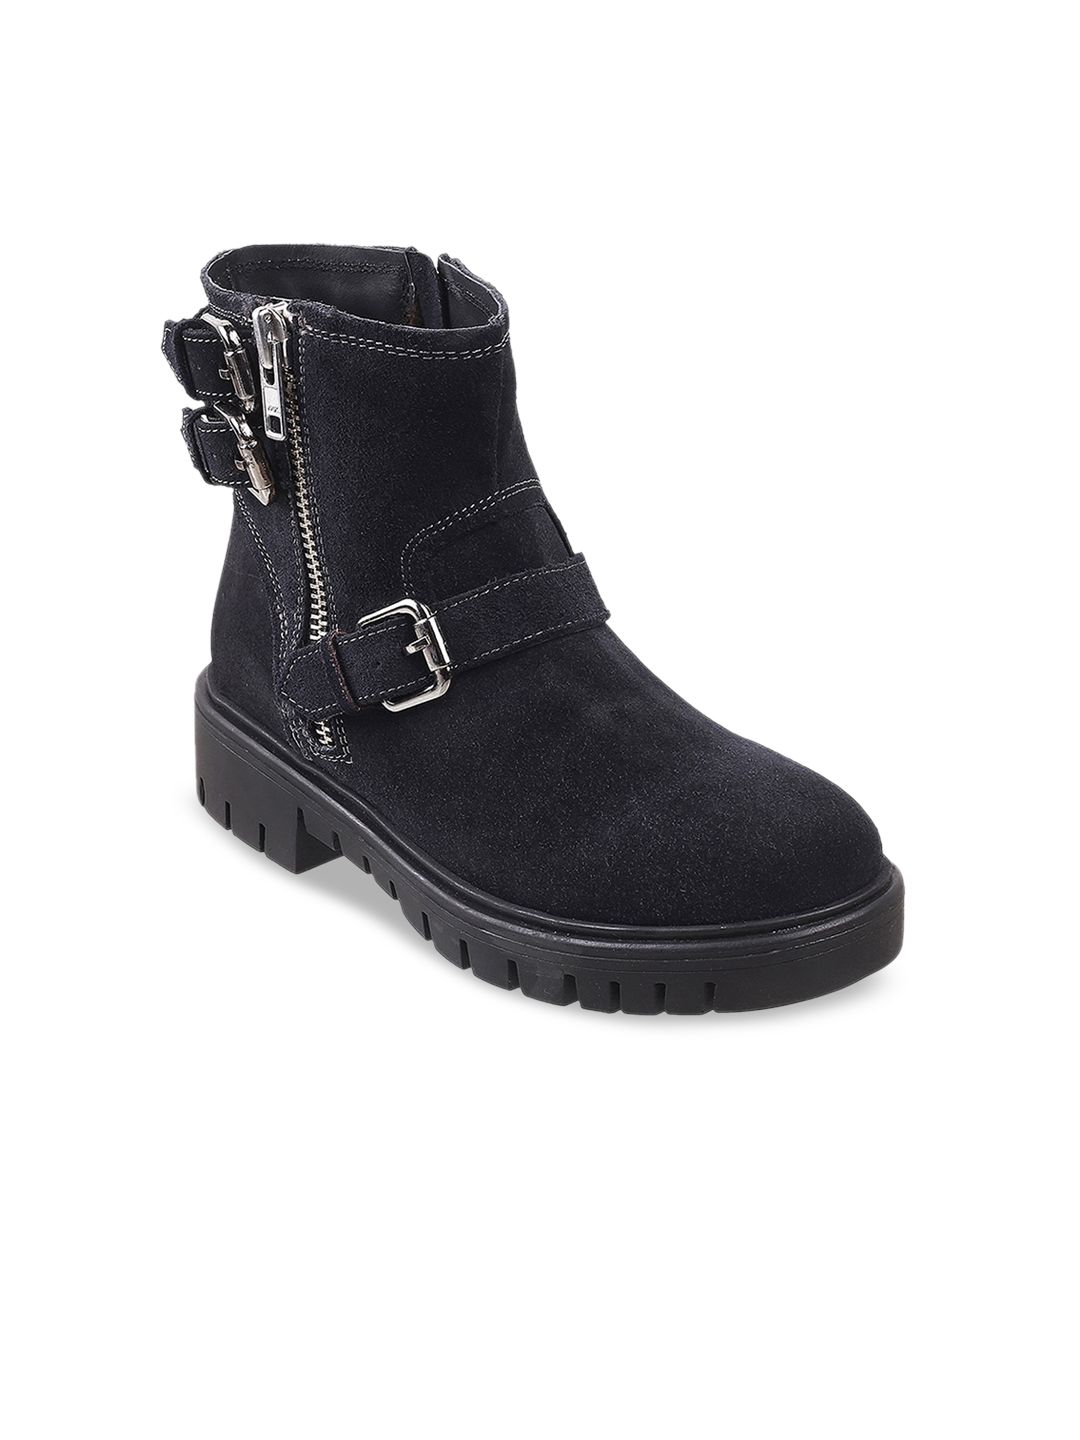 Metro Women Navy Blue High-Top Flat Boots With Buckles Price in India